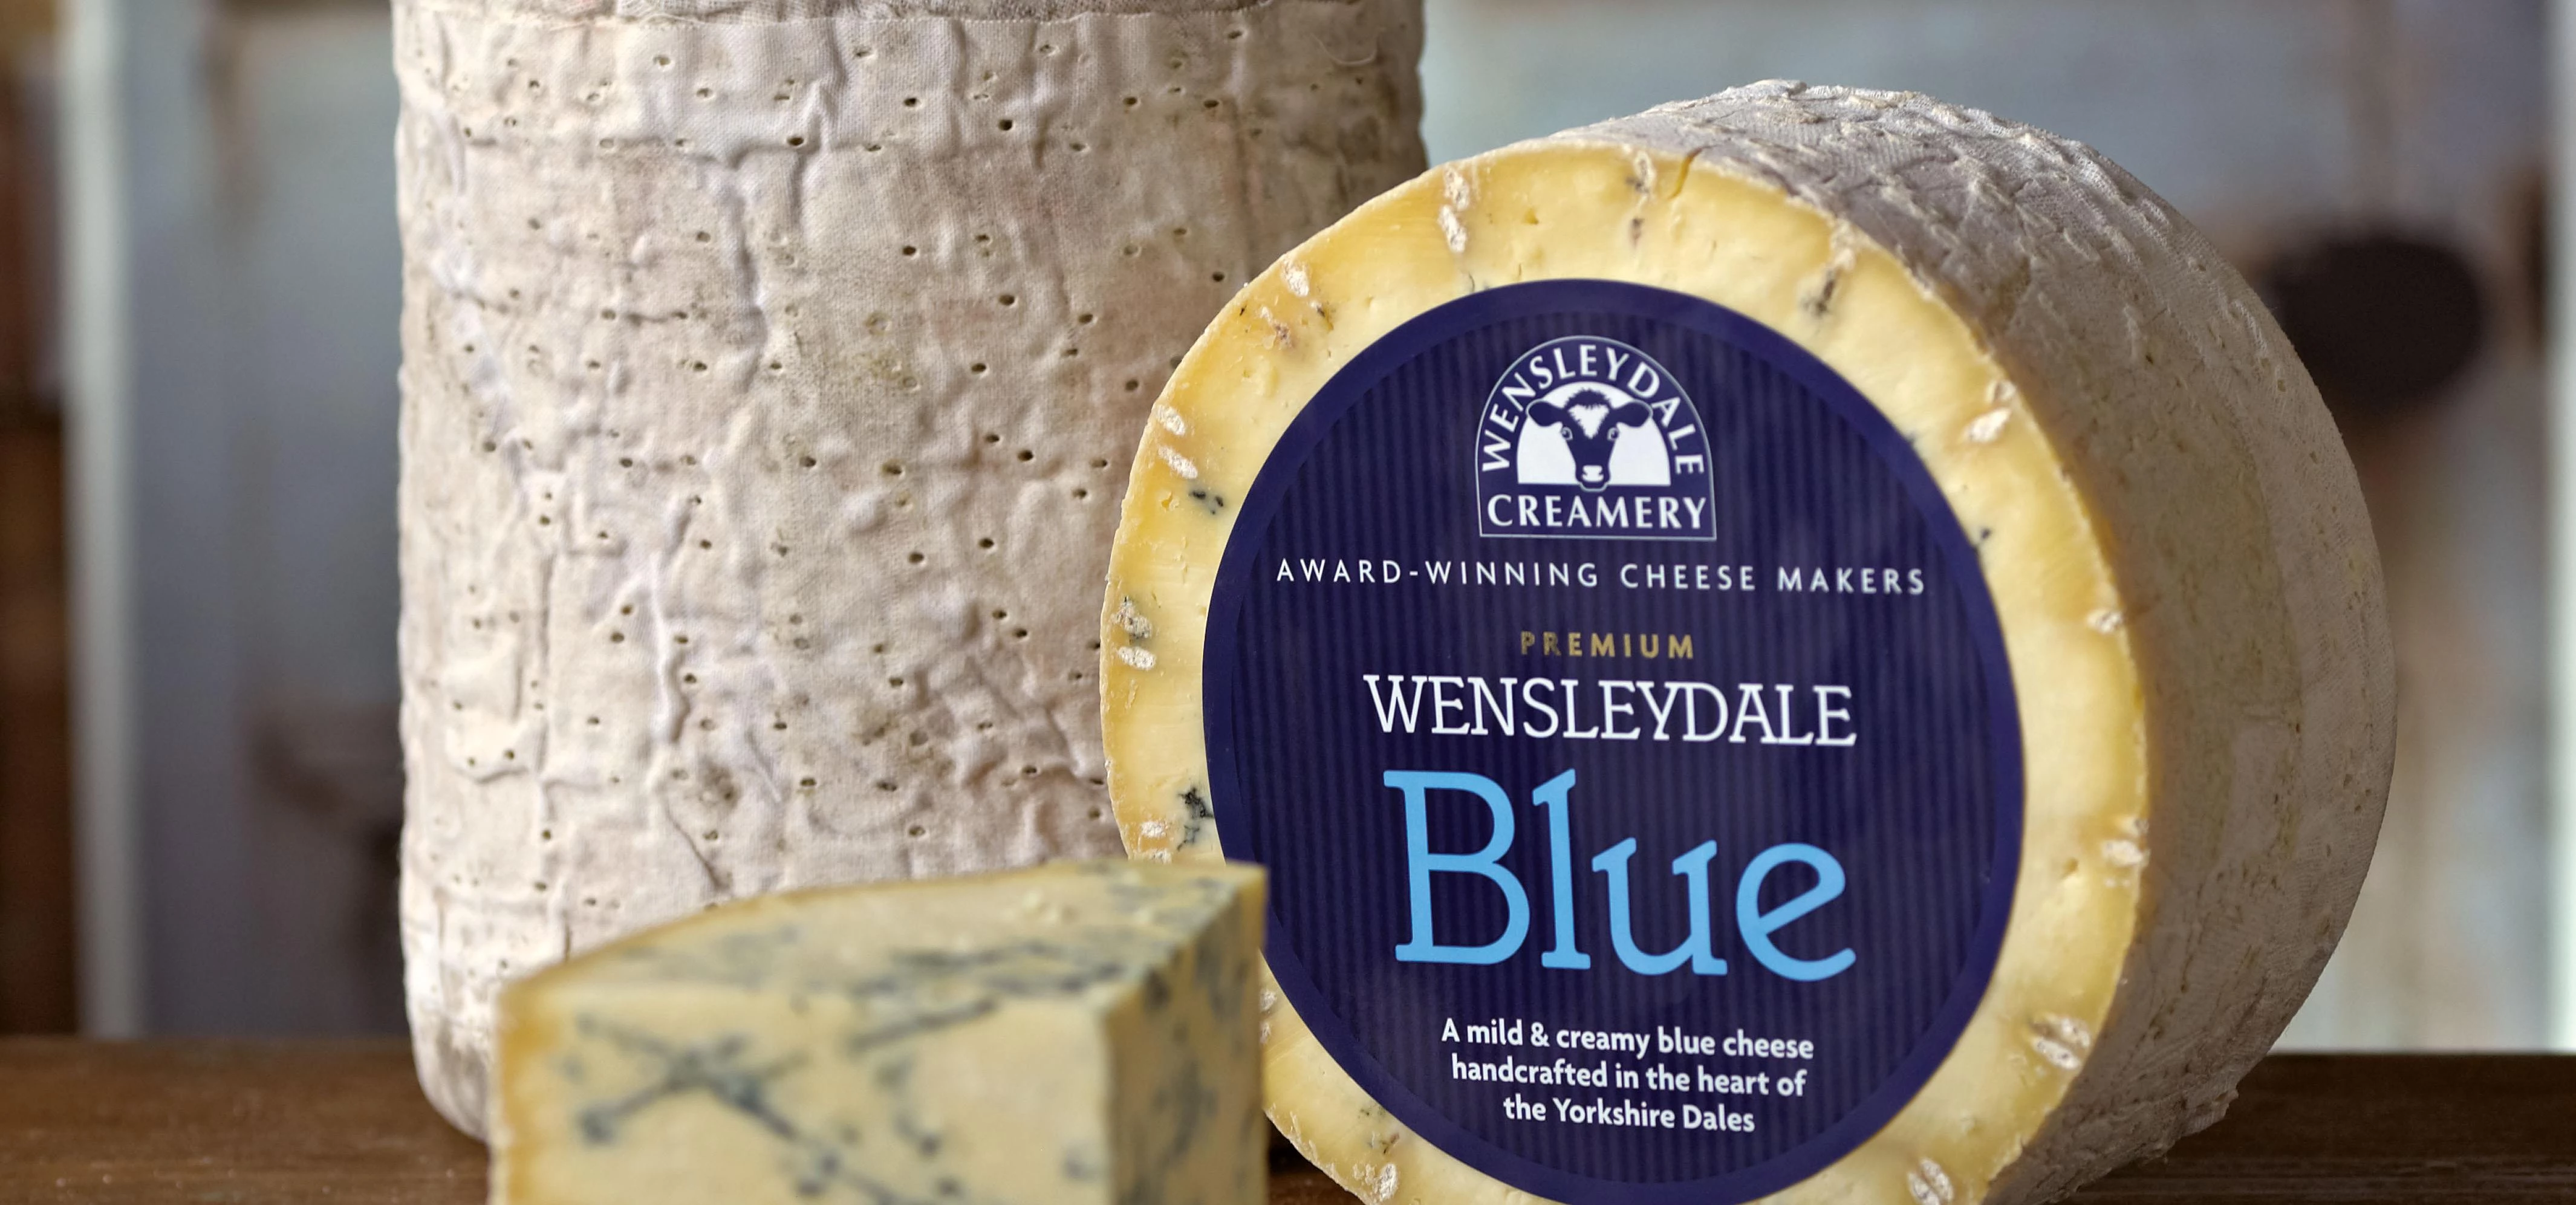 The Wensleydale Creamery scoops Super Gold at the World Cheese Awards